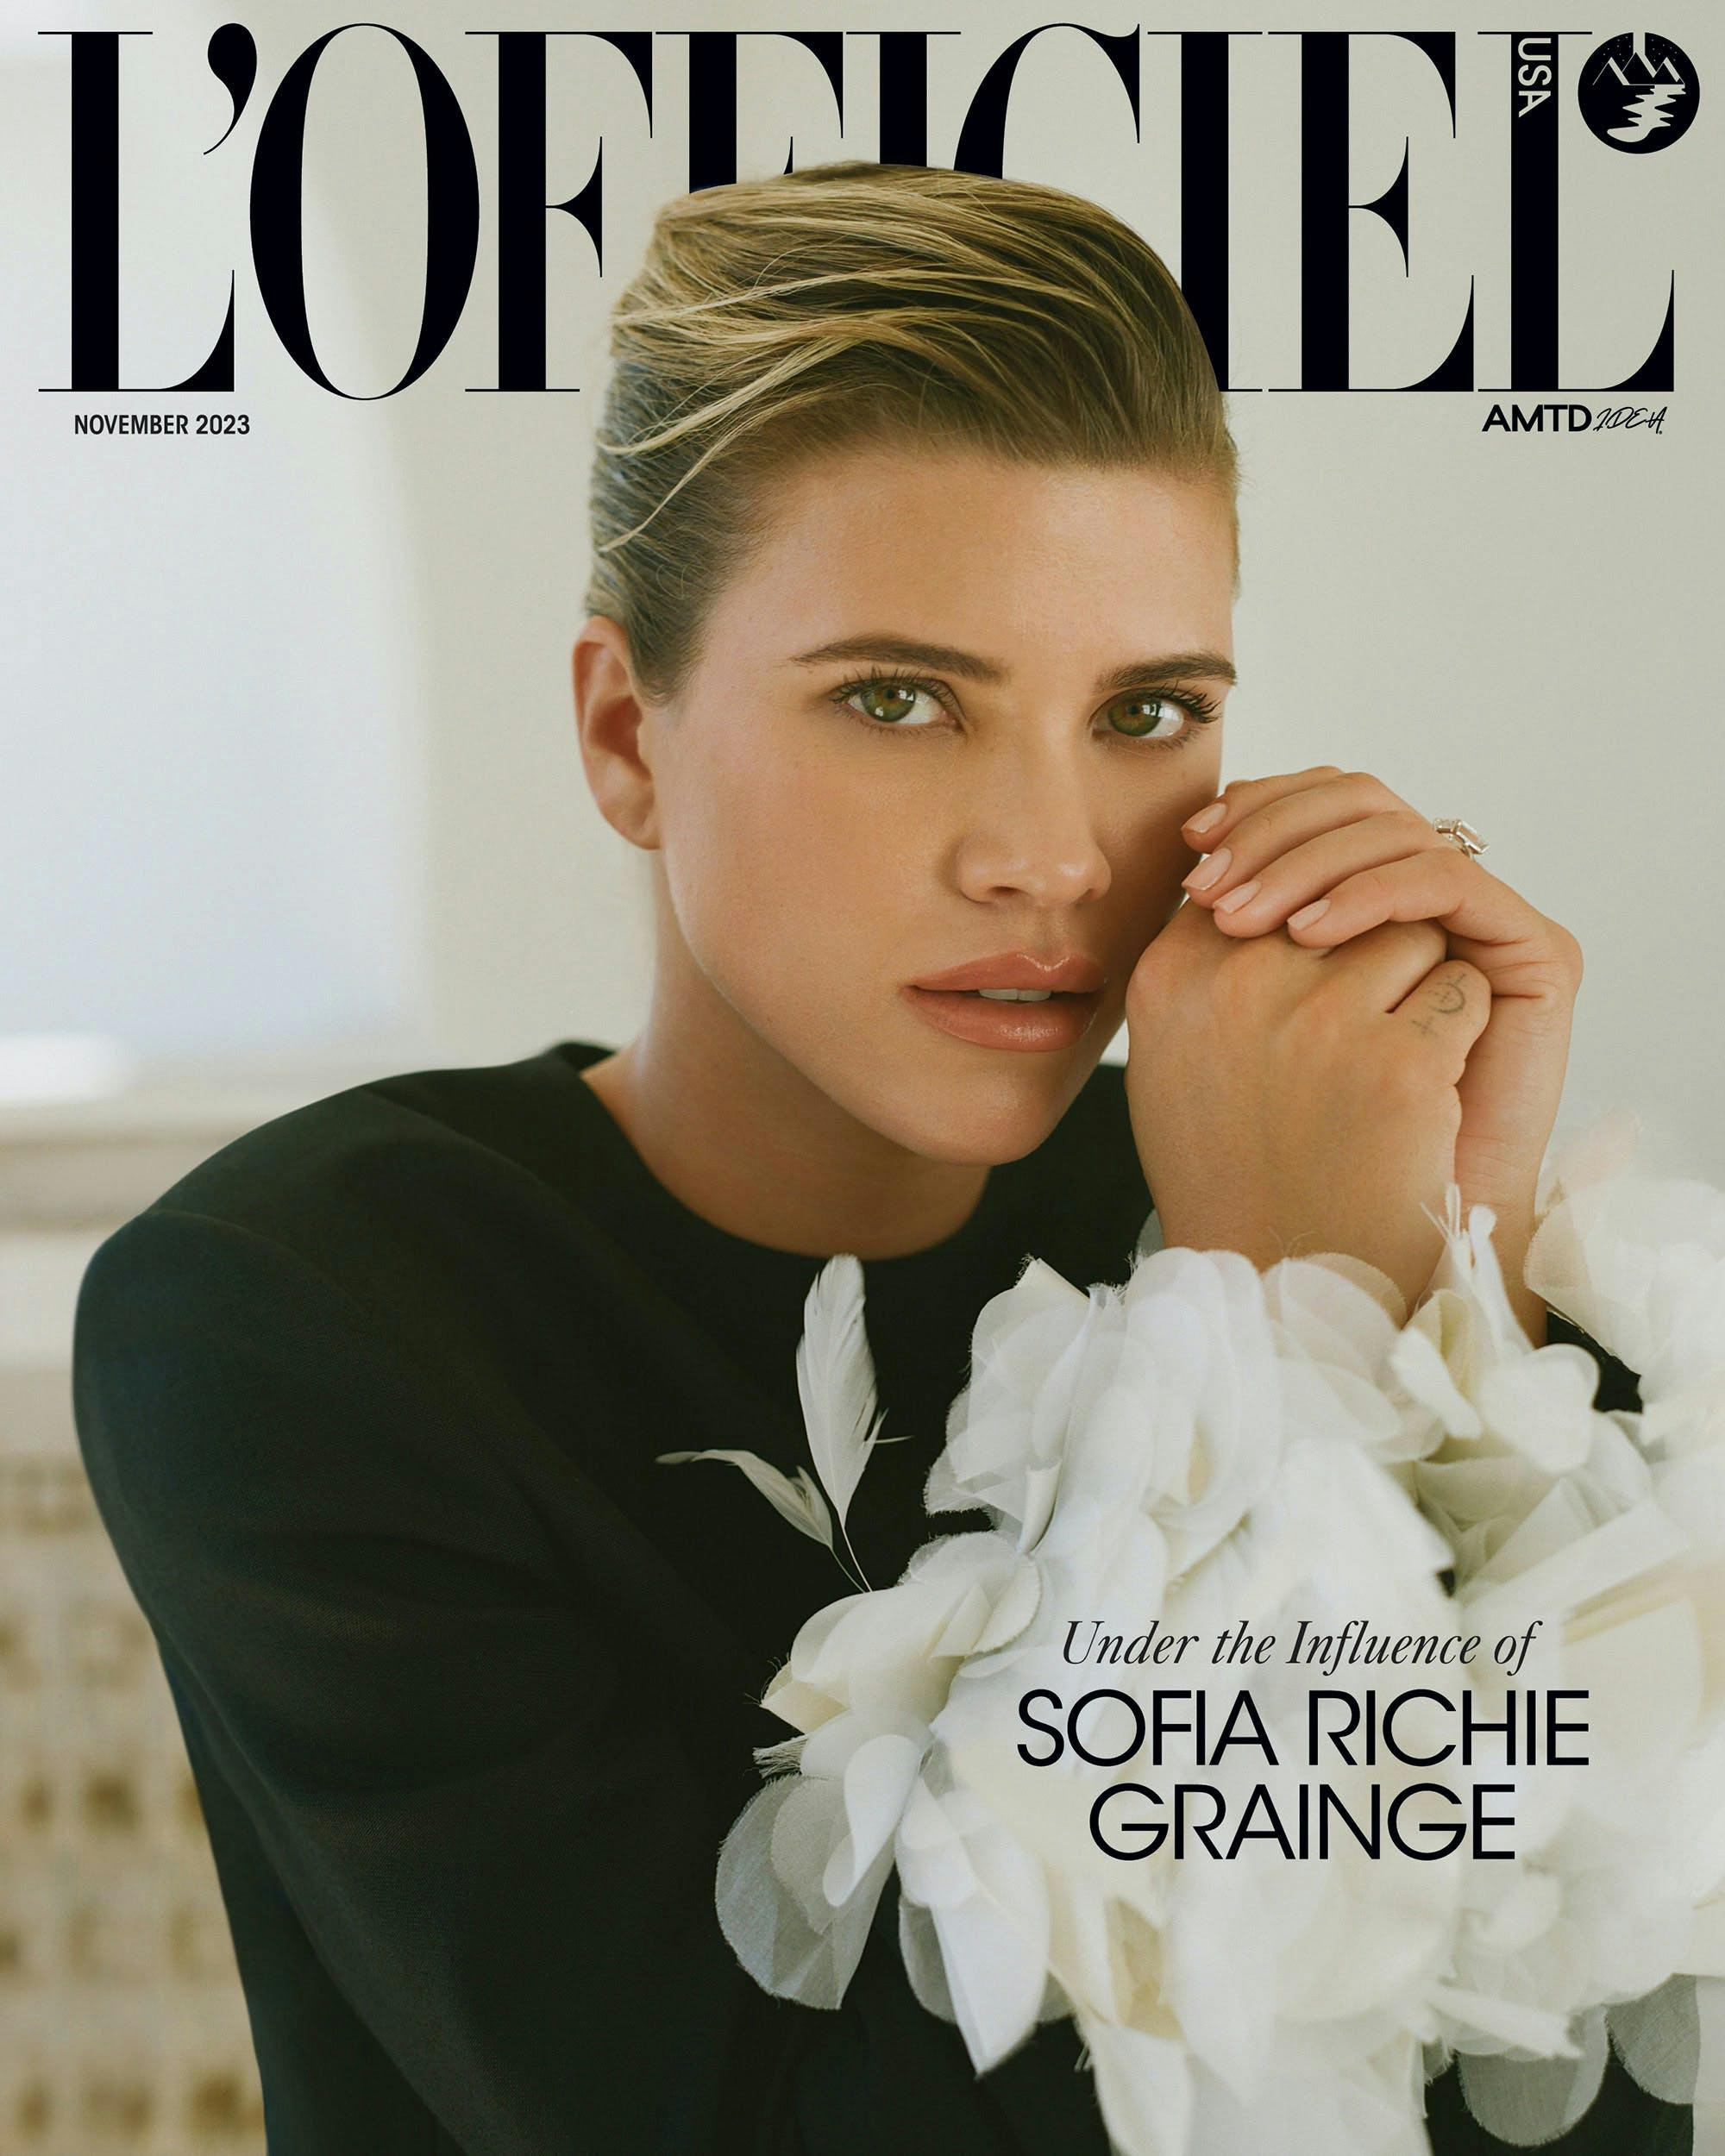 sofia richie on the cover of l'officiel with slicked back hair and wearing a black shirt